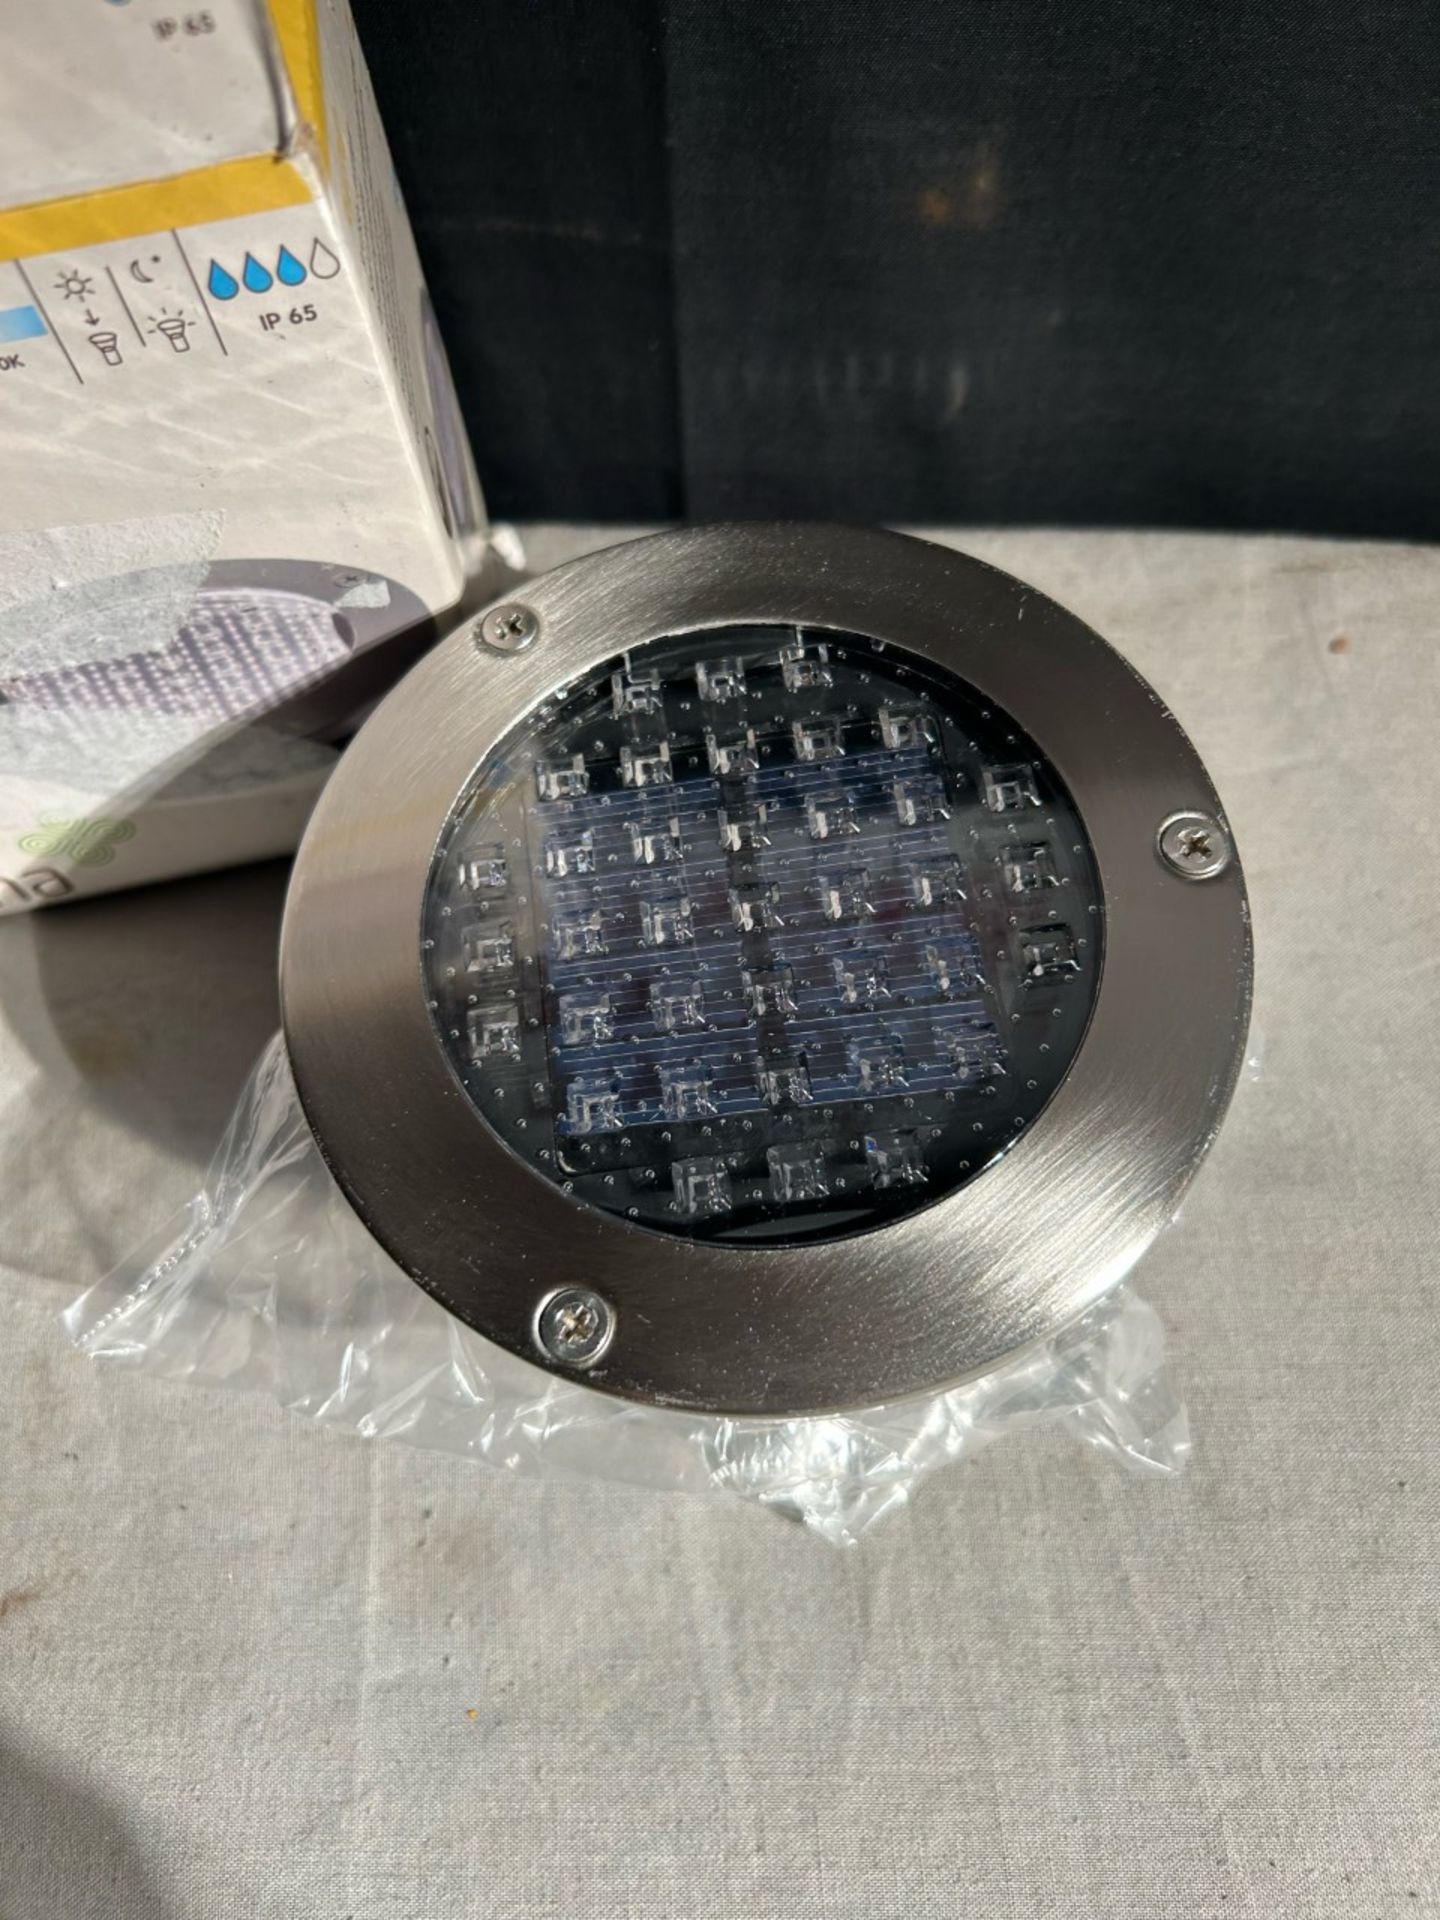 Blooma glend recessed deck lights 2 in box. New. Untested - Image 2 of 2